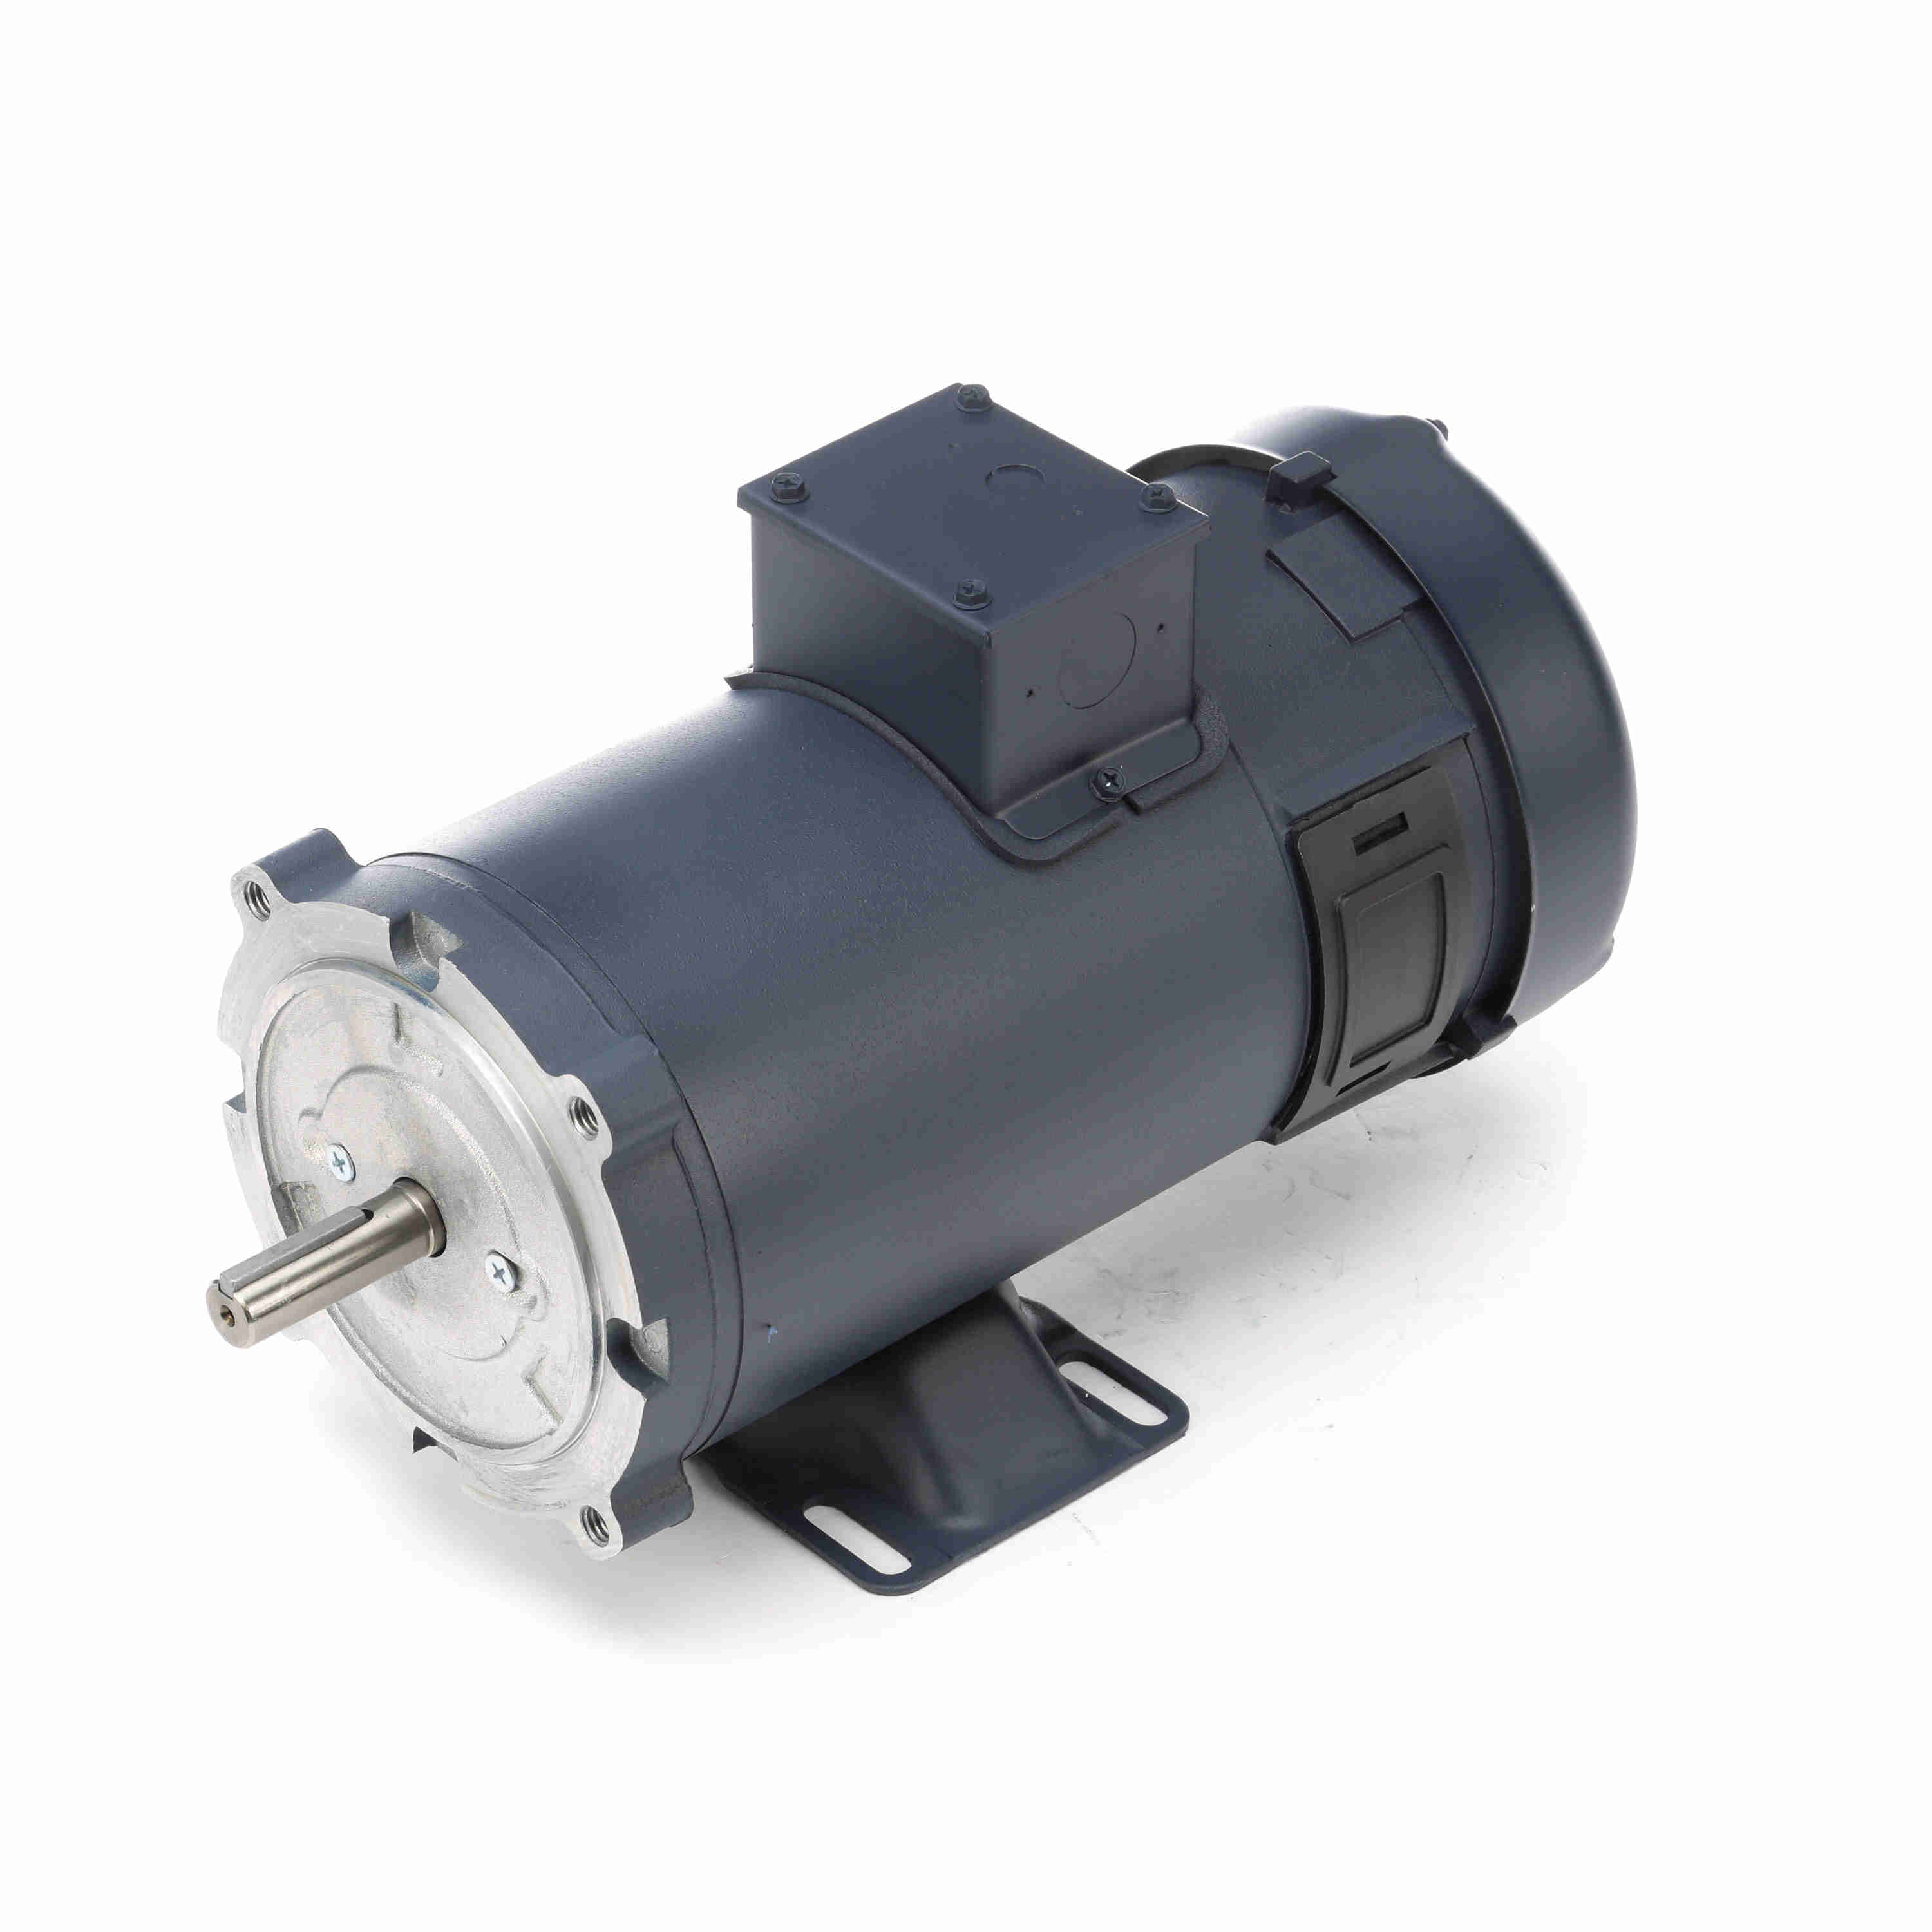 109102.00 Leeson 1HP Low Voltage DC Electric Motor, 1800RPM 2